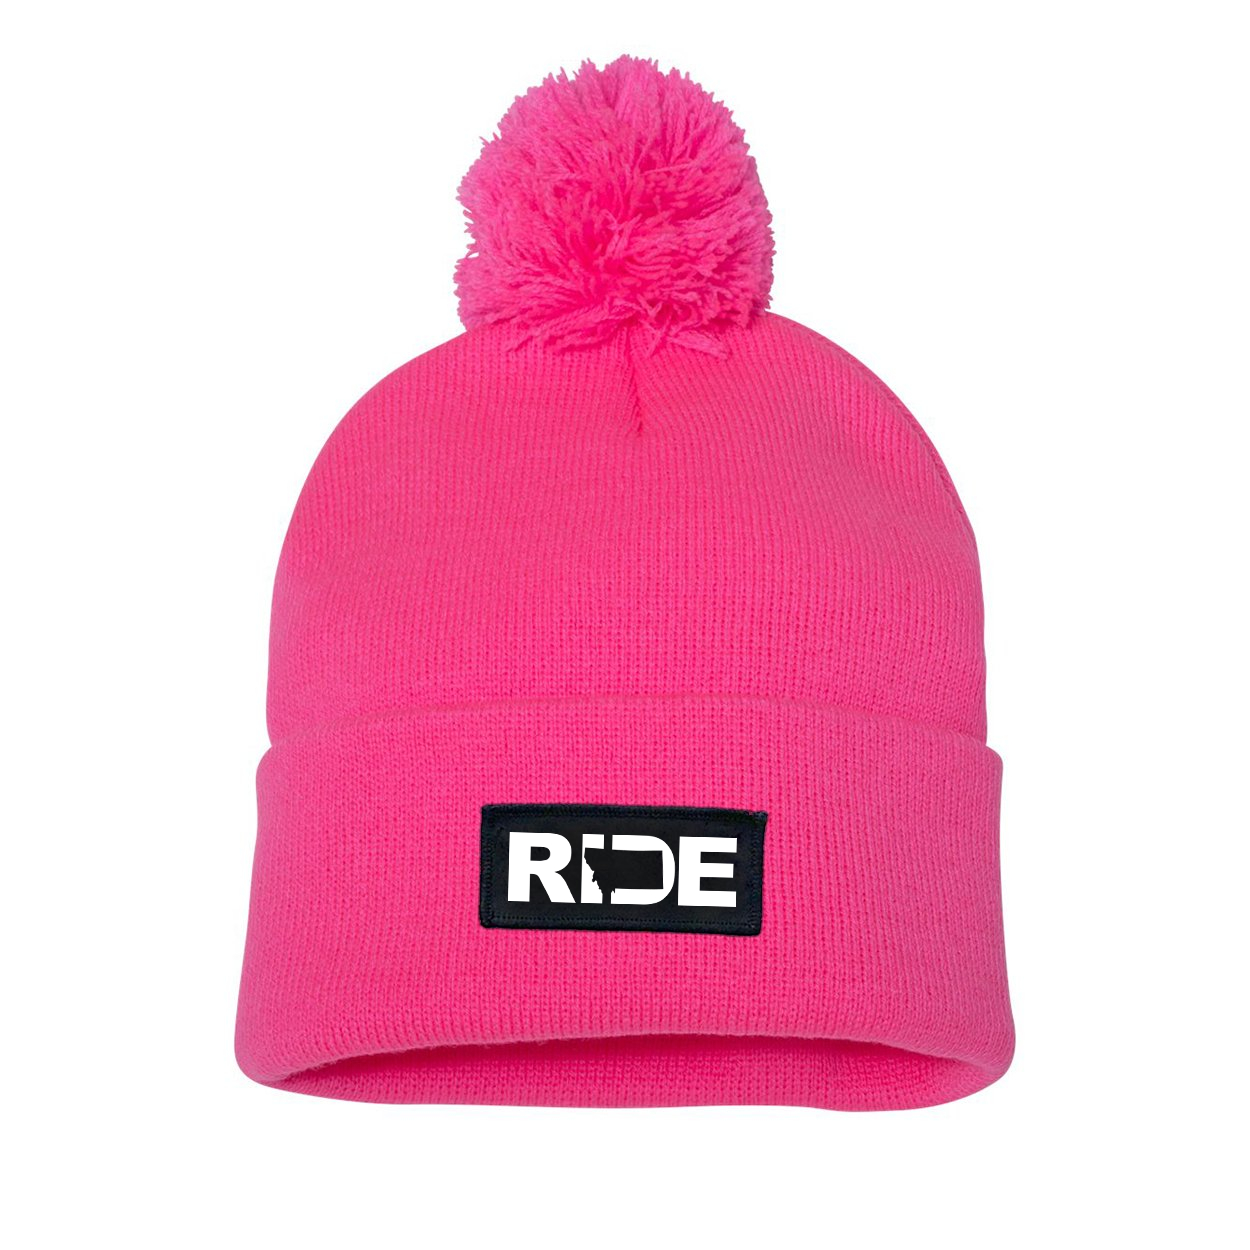 Ride Montana Night Out Woven Patch Roll Up Pom Knit Beanie Pink (White Logo)